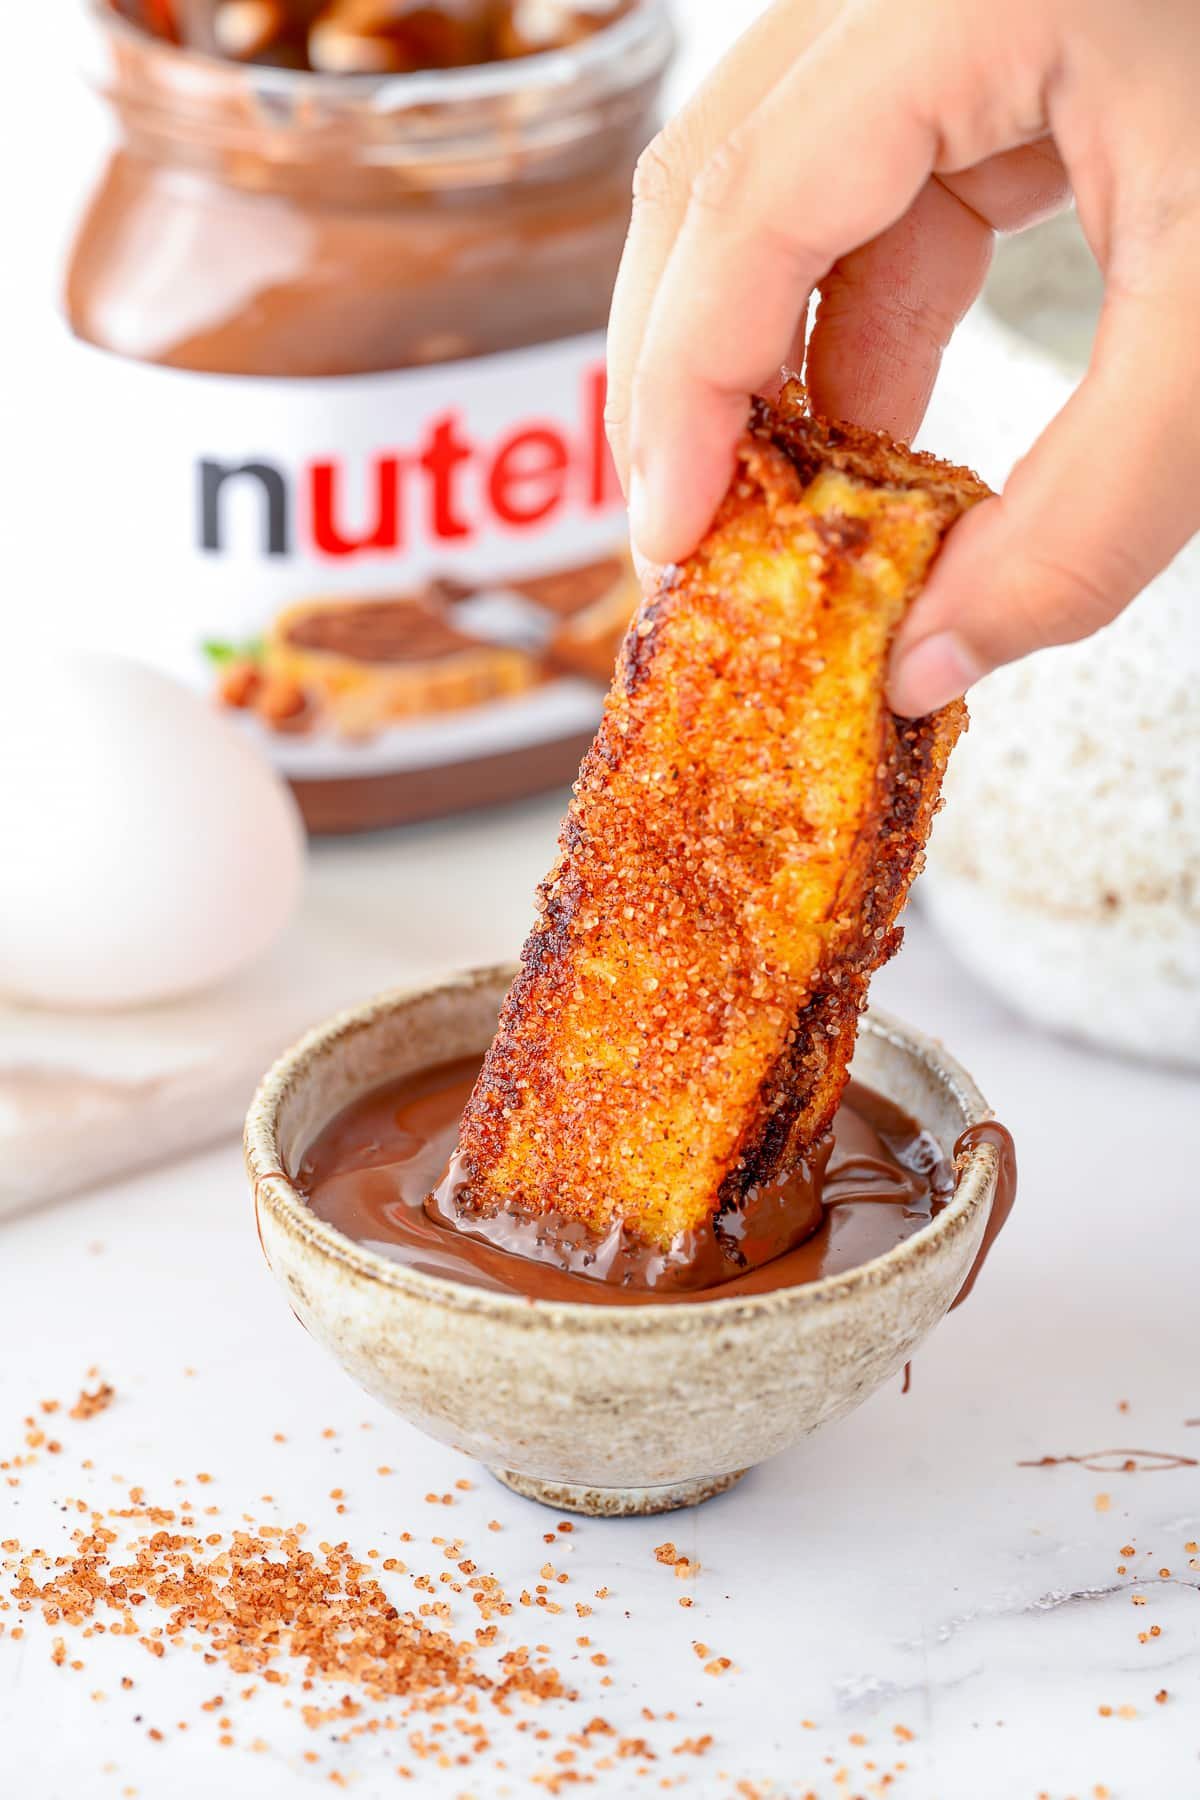 Hand dipping one of the French toast sticks in Nutella.